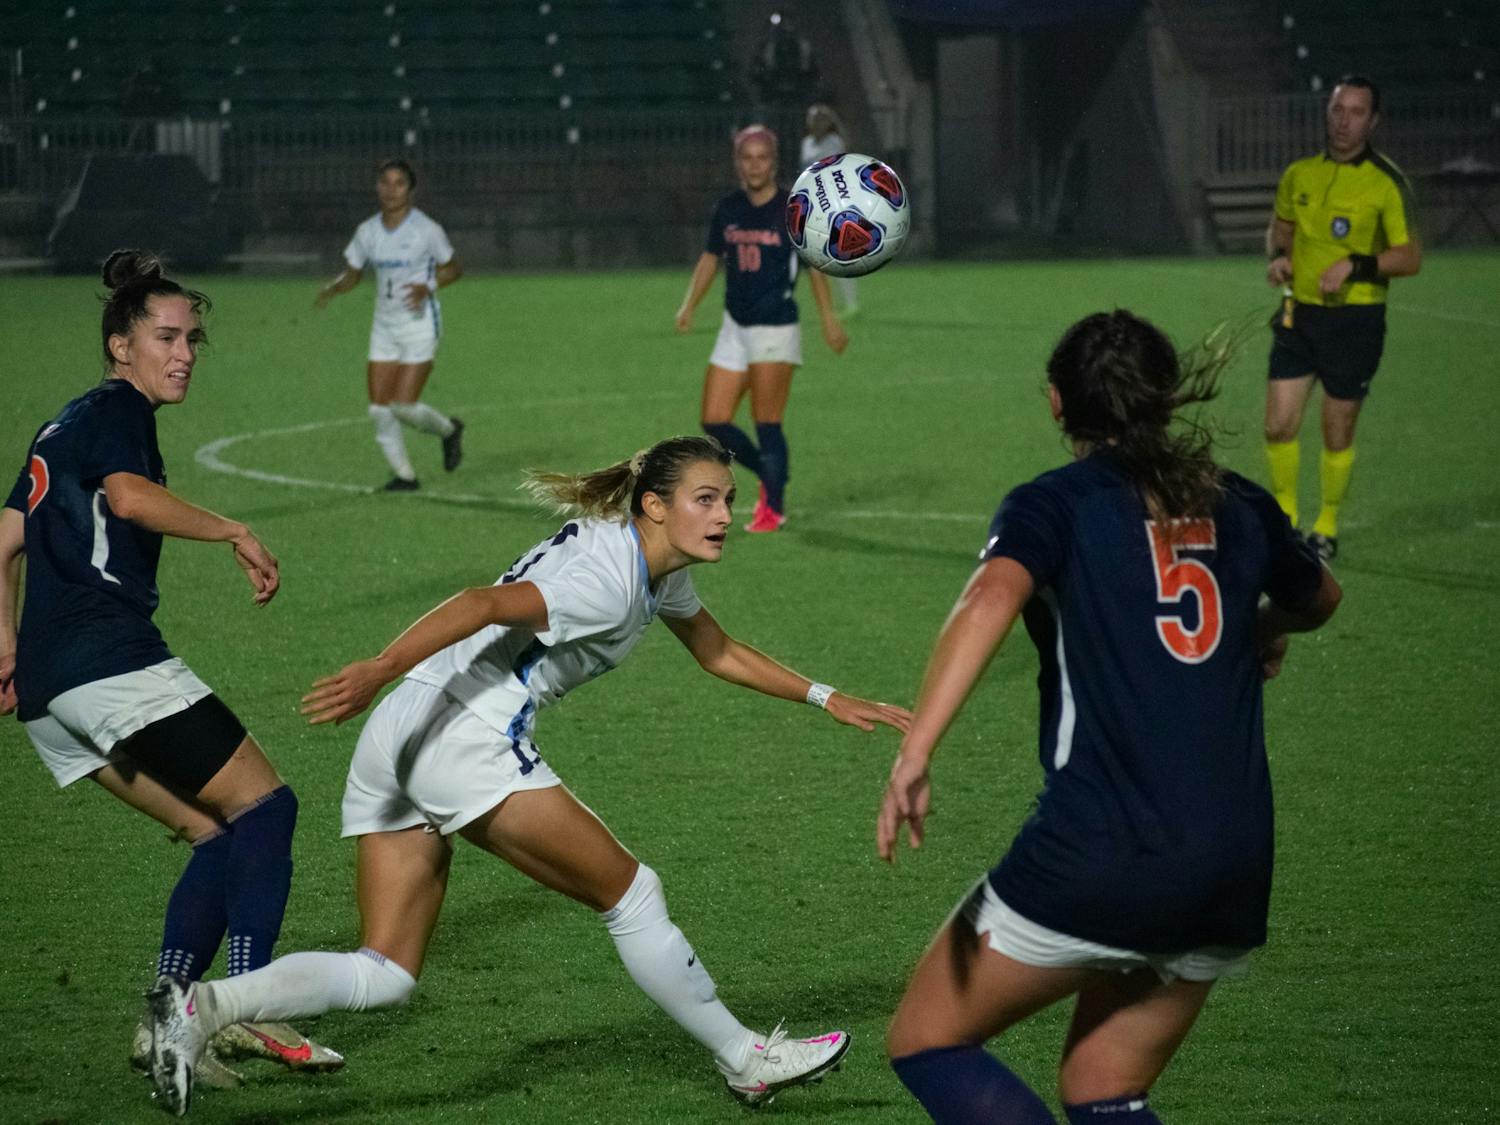 Virginia players go up against UNC in the women's soccer game at Dorrance field on Friday, Nov. 13, 2020. UNC beat Virginia 2-0 in the ACC semifinal game.